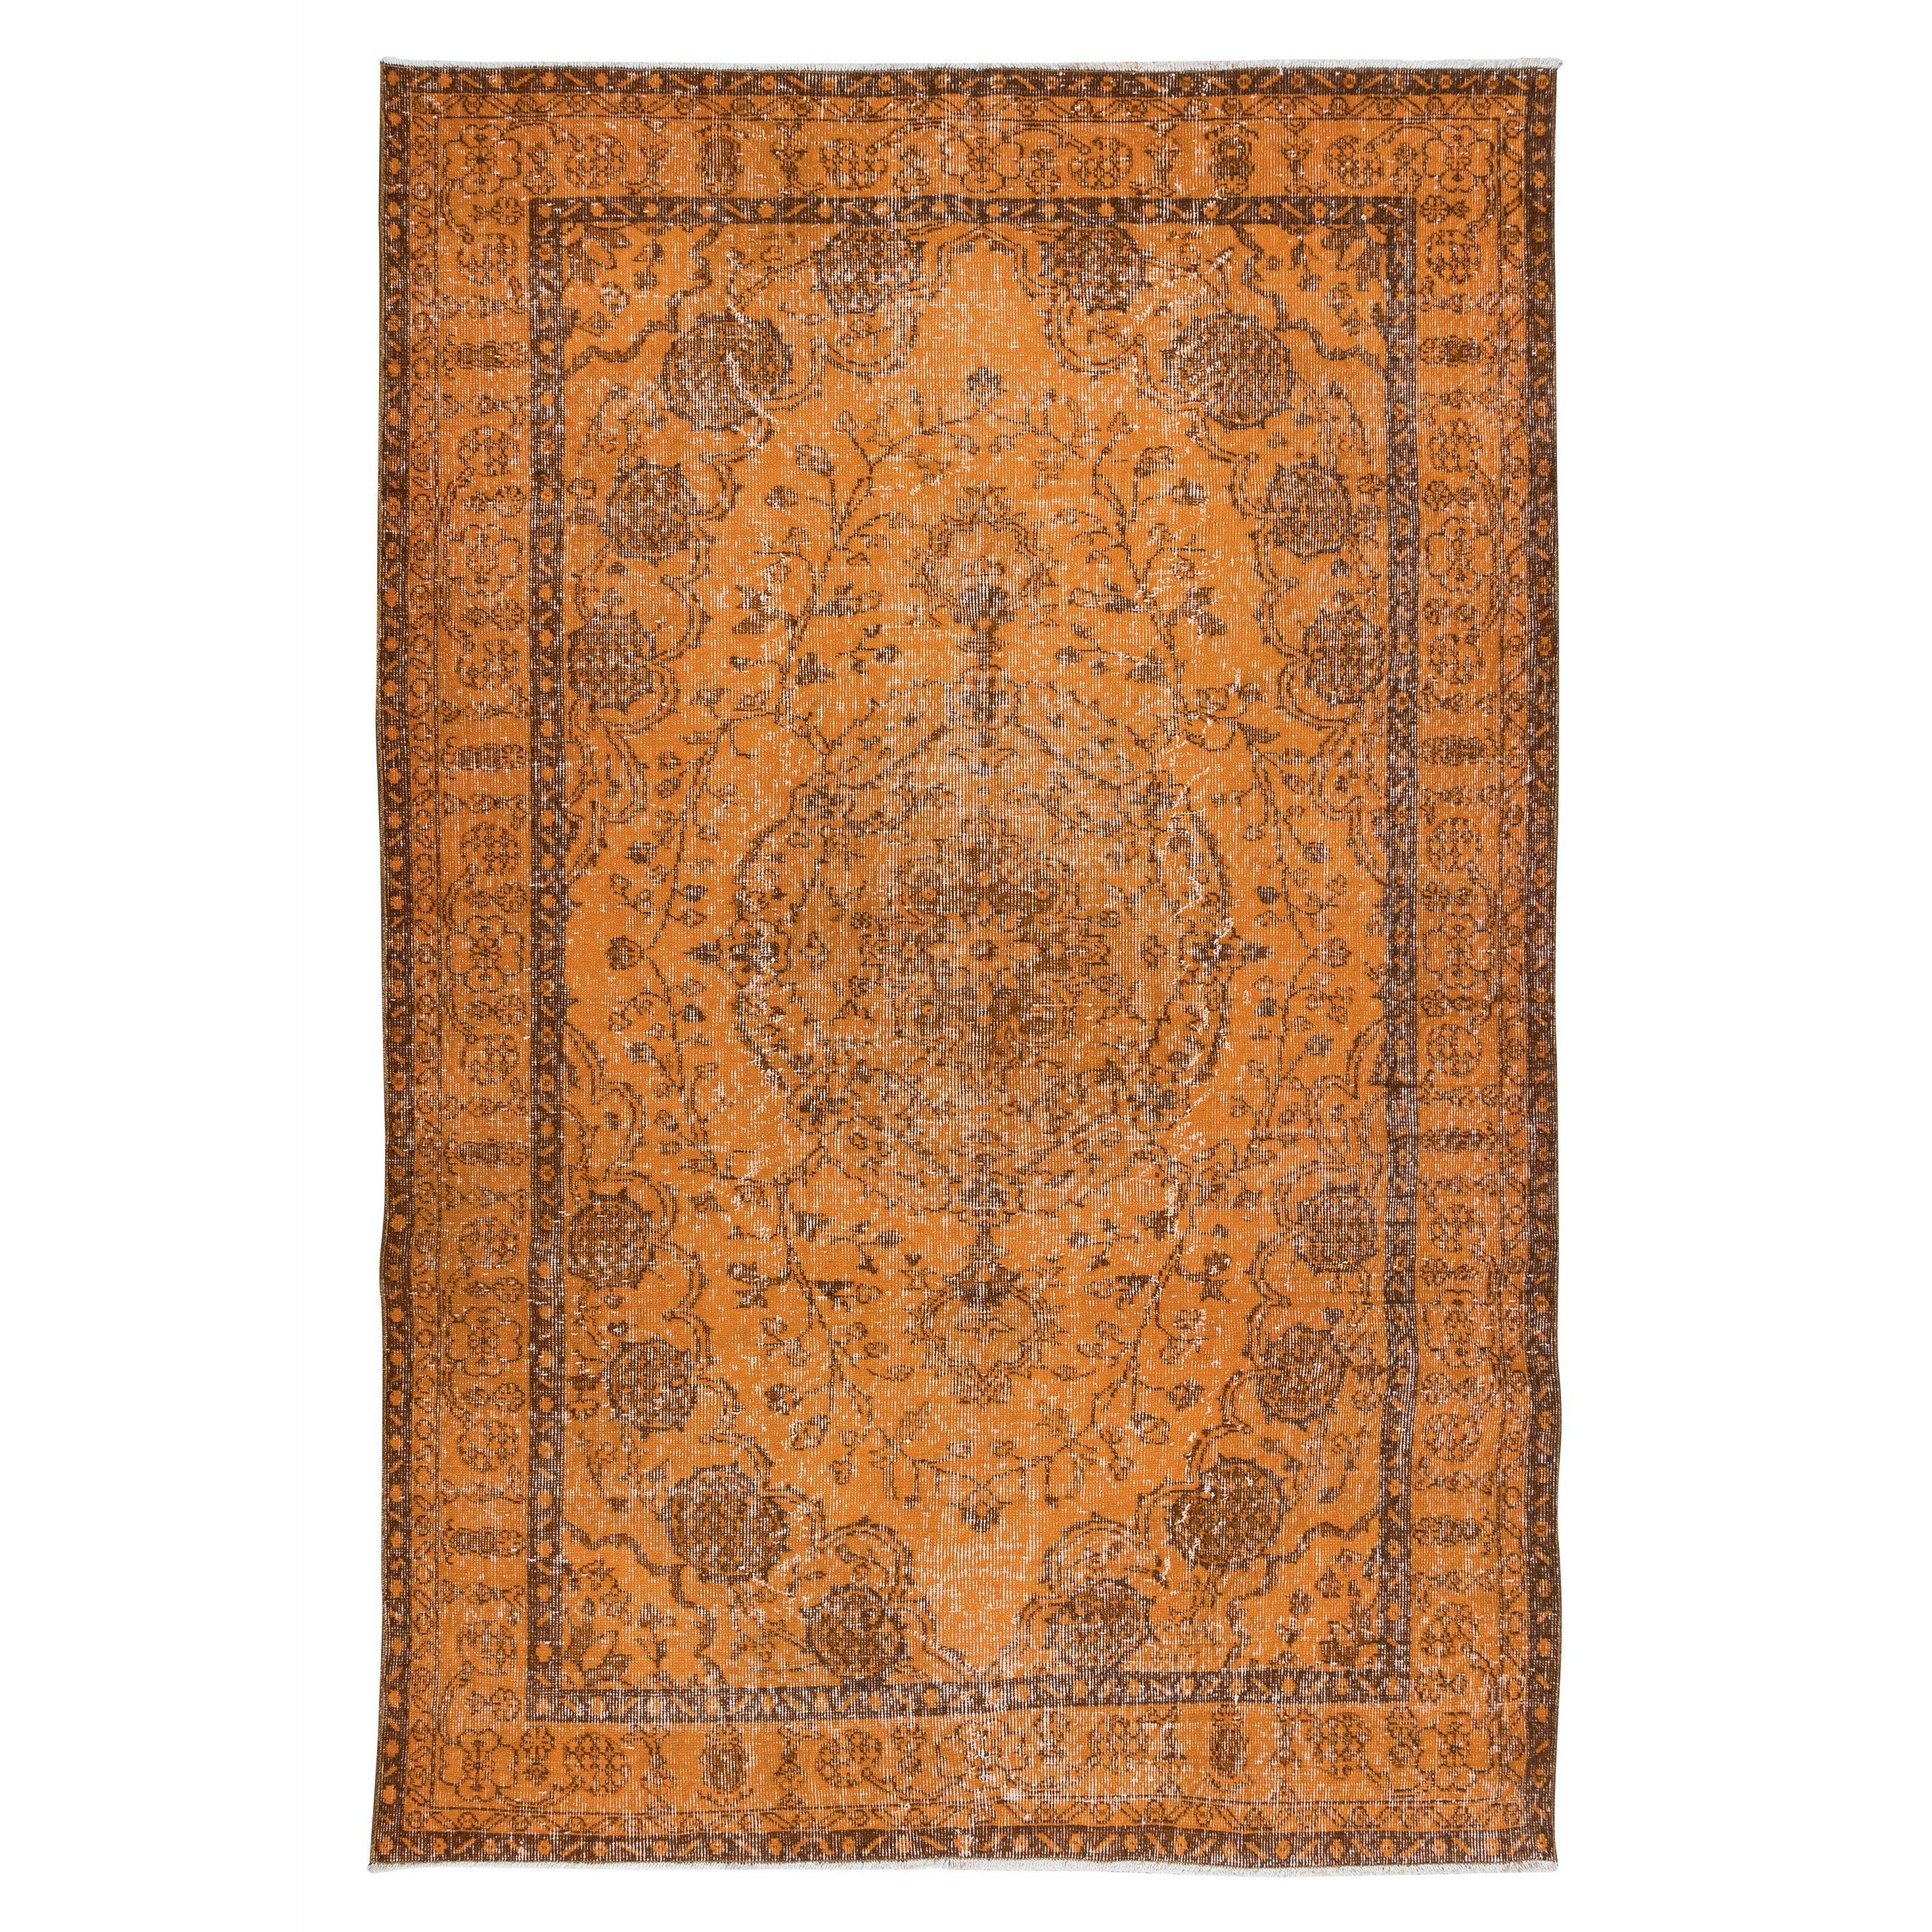 6x9 Ft Orange Area Rug for Modern Interiors, Hand Knotted in Turkey